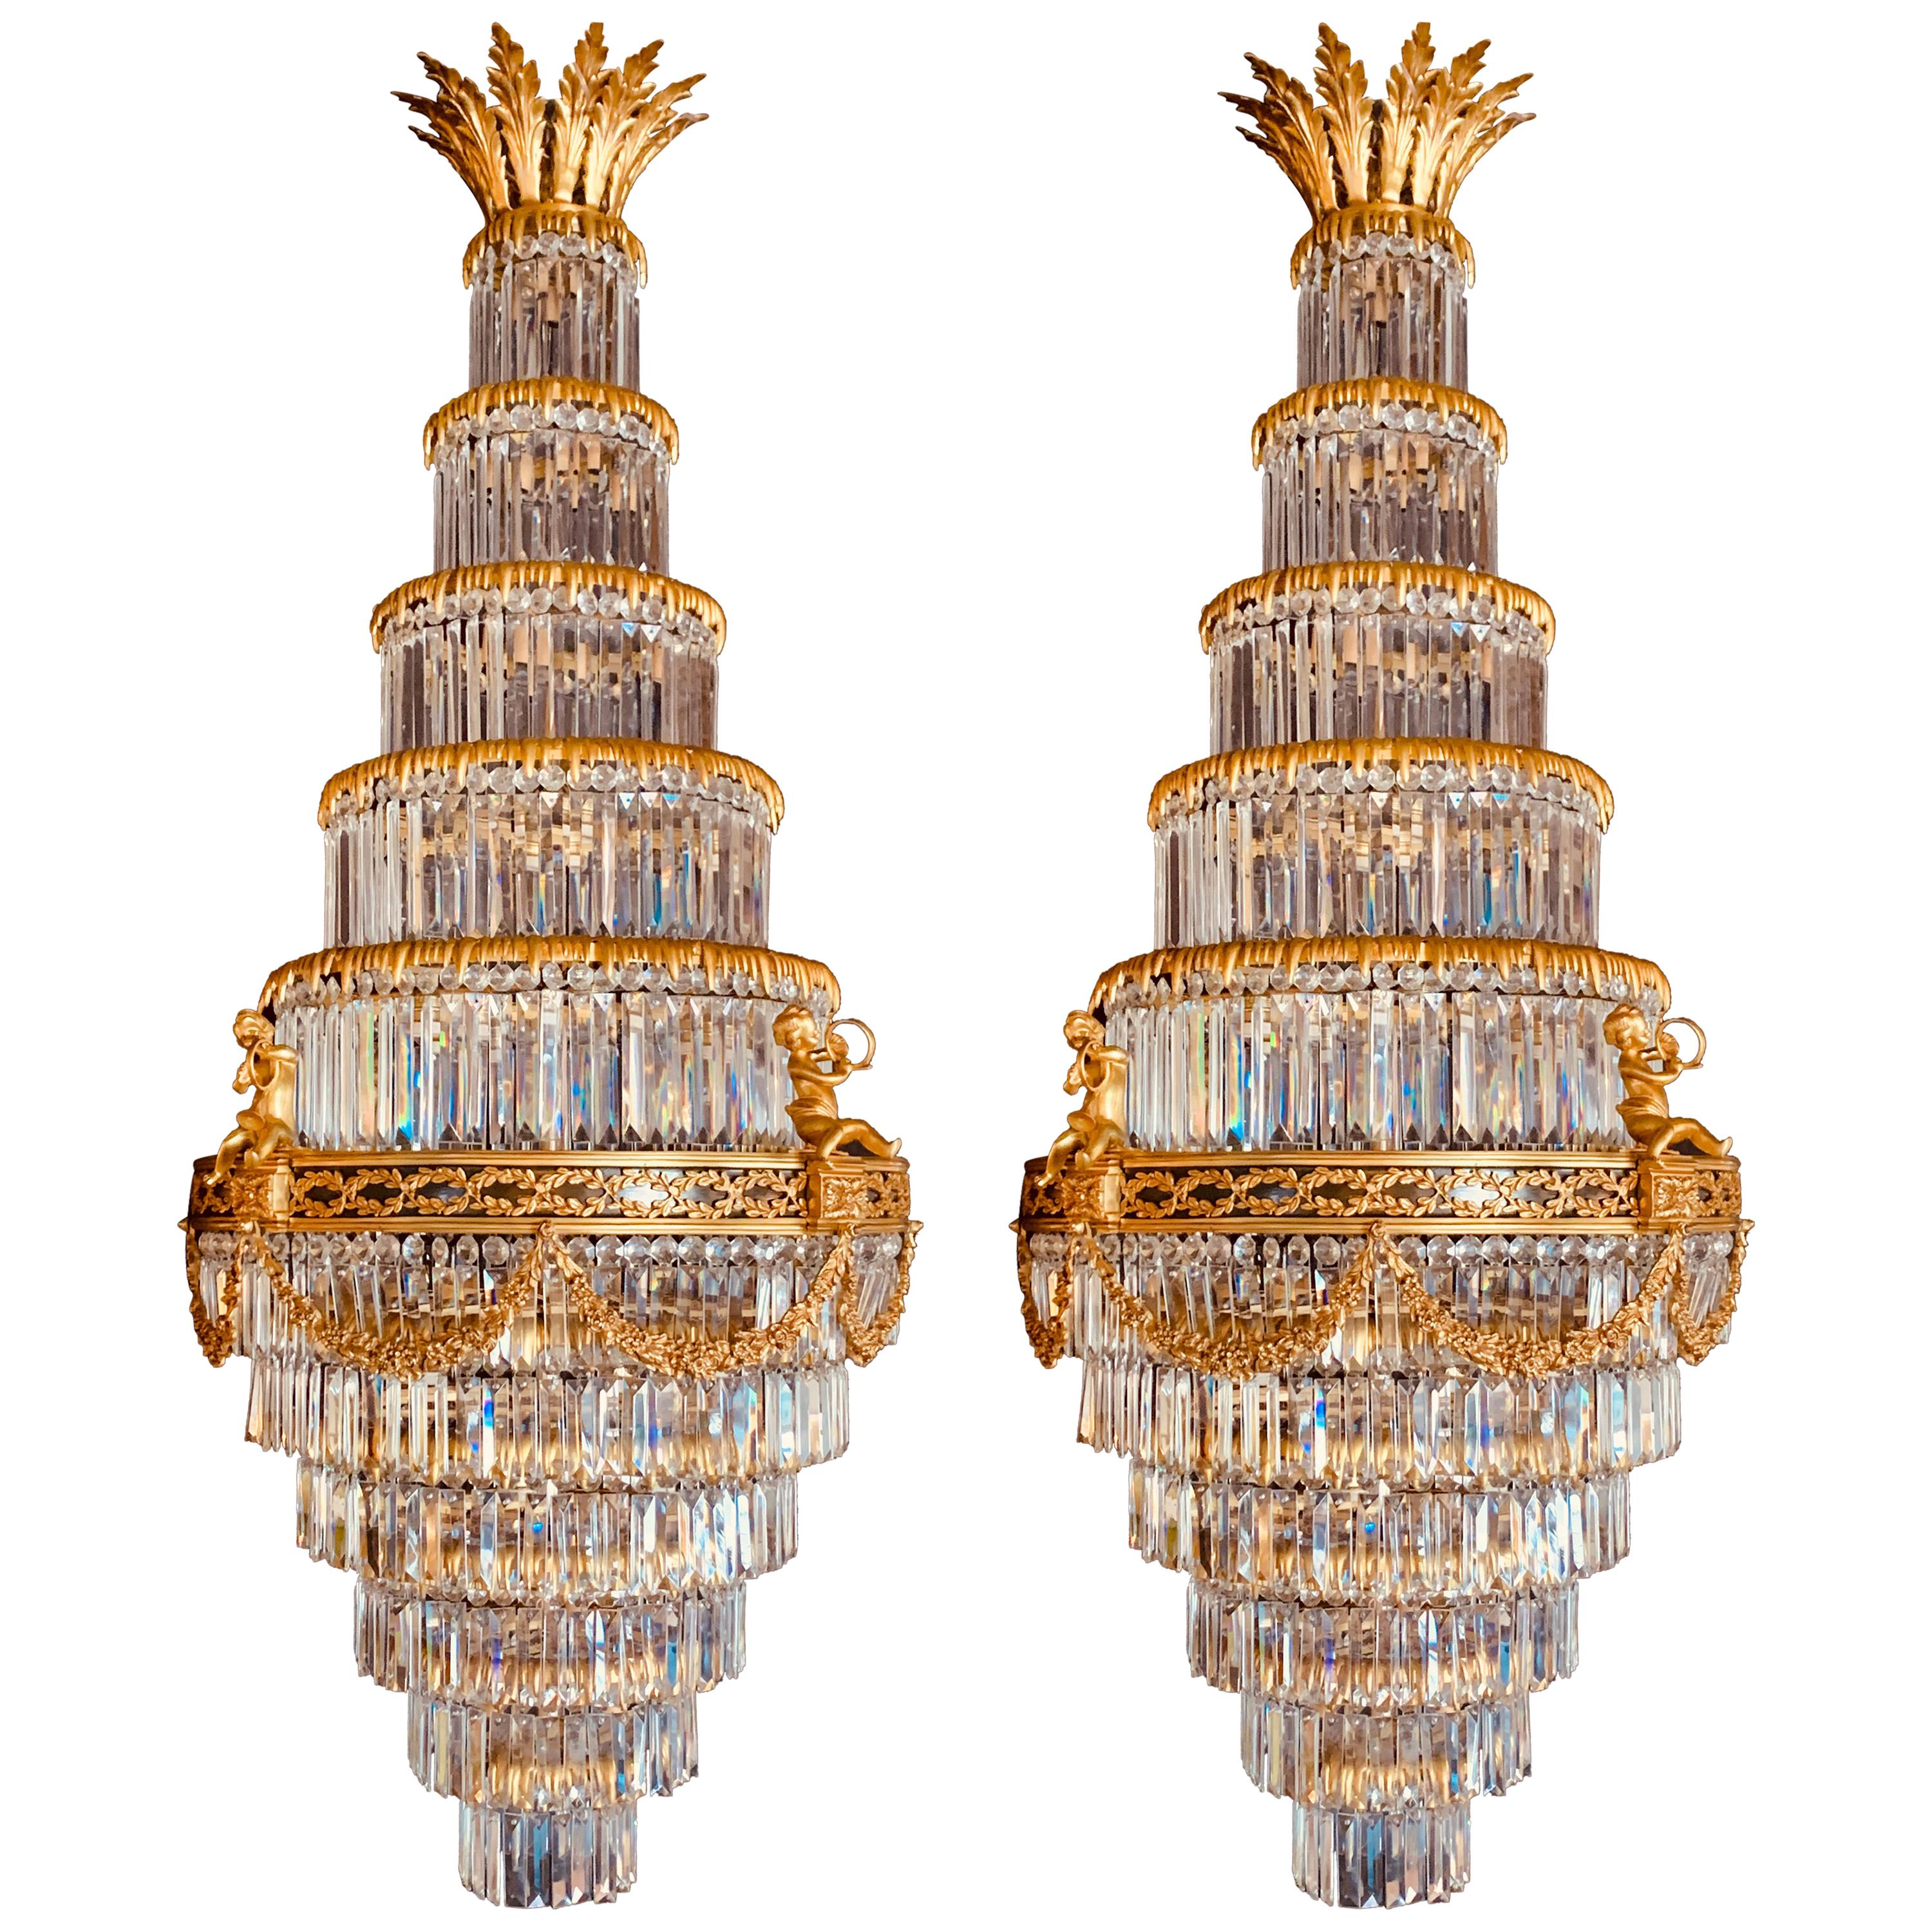 Pair of Louis XVI Style Gilt Bronze and Crystal Swag Neoclassical Chandeliers